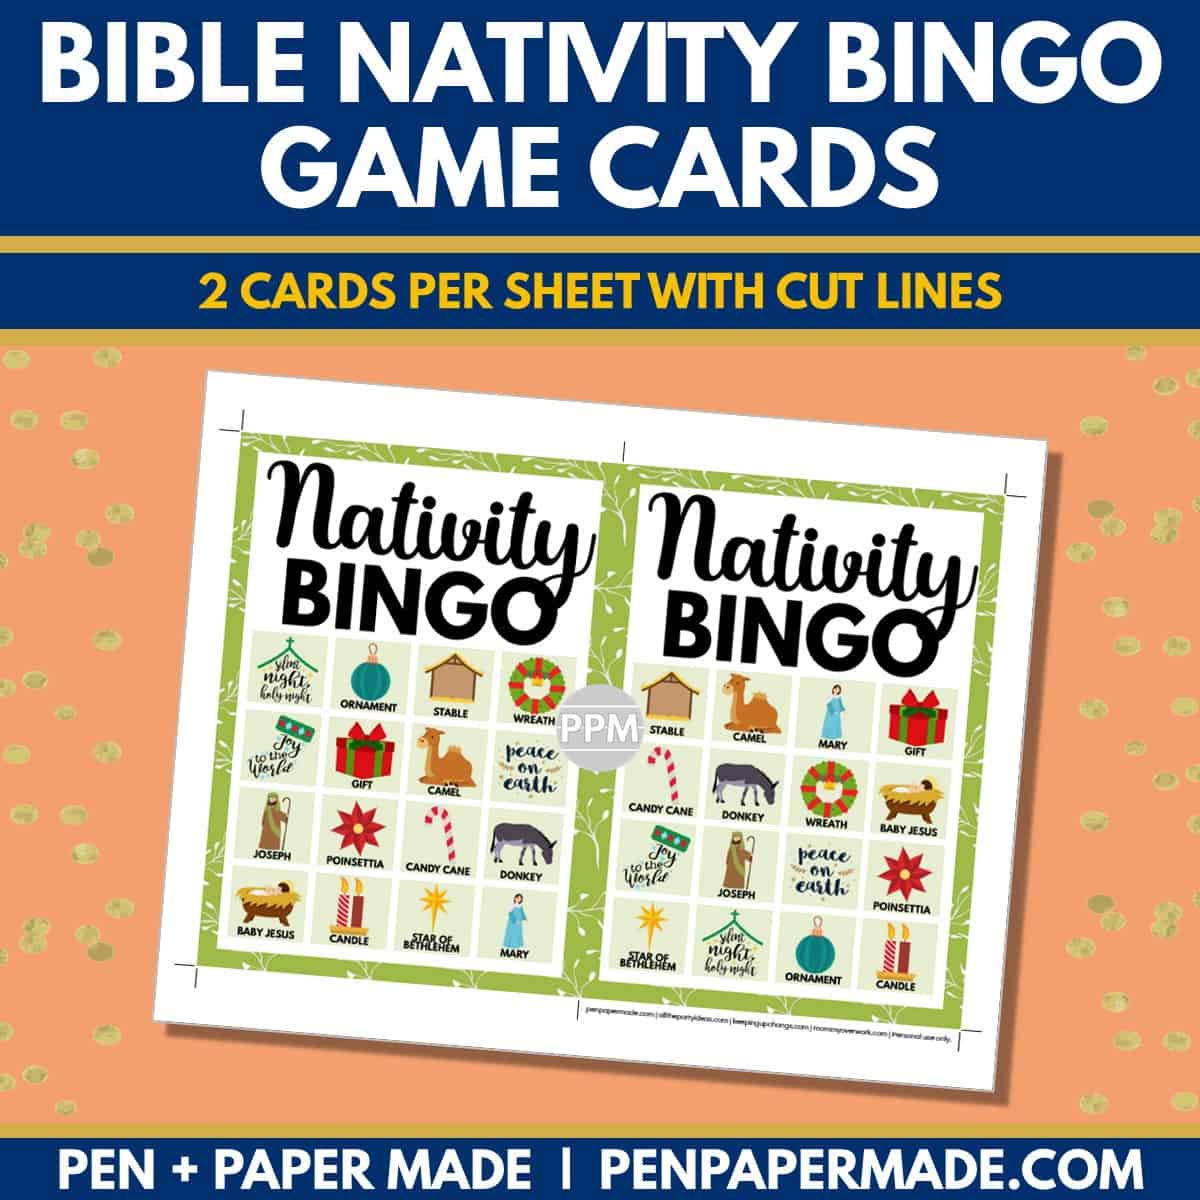 bible nativity christmas bingo card 4x4 5x7 game boards with images and text words.